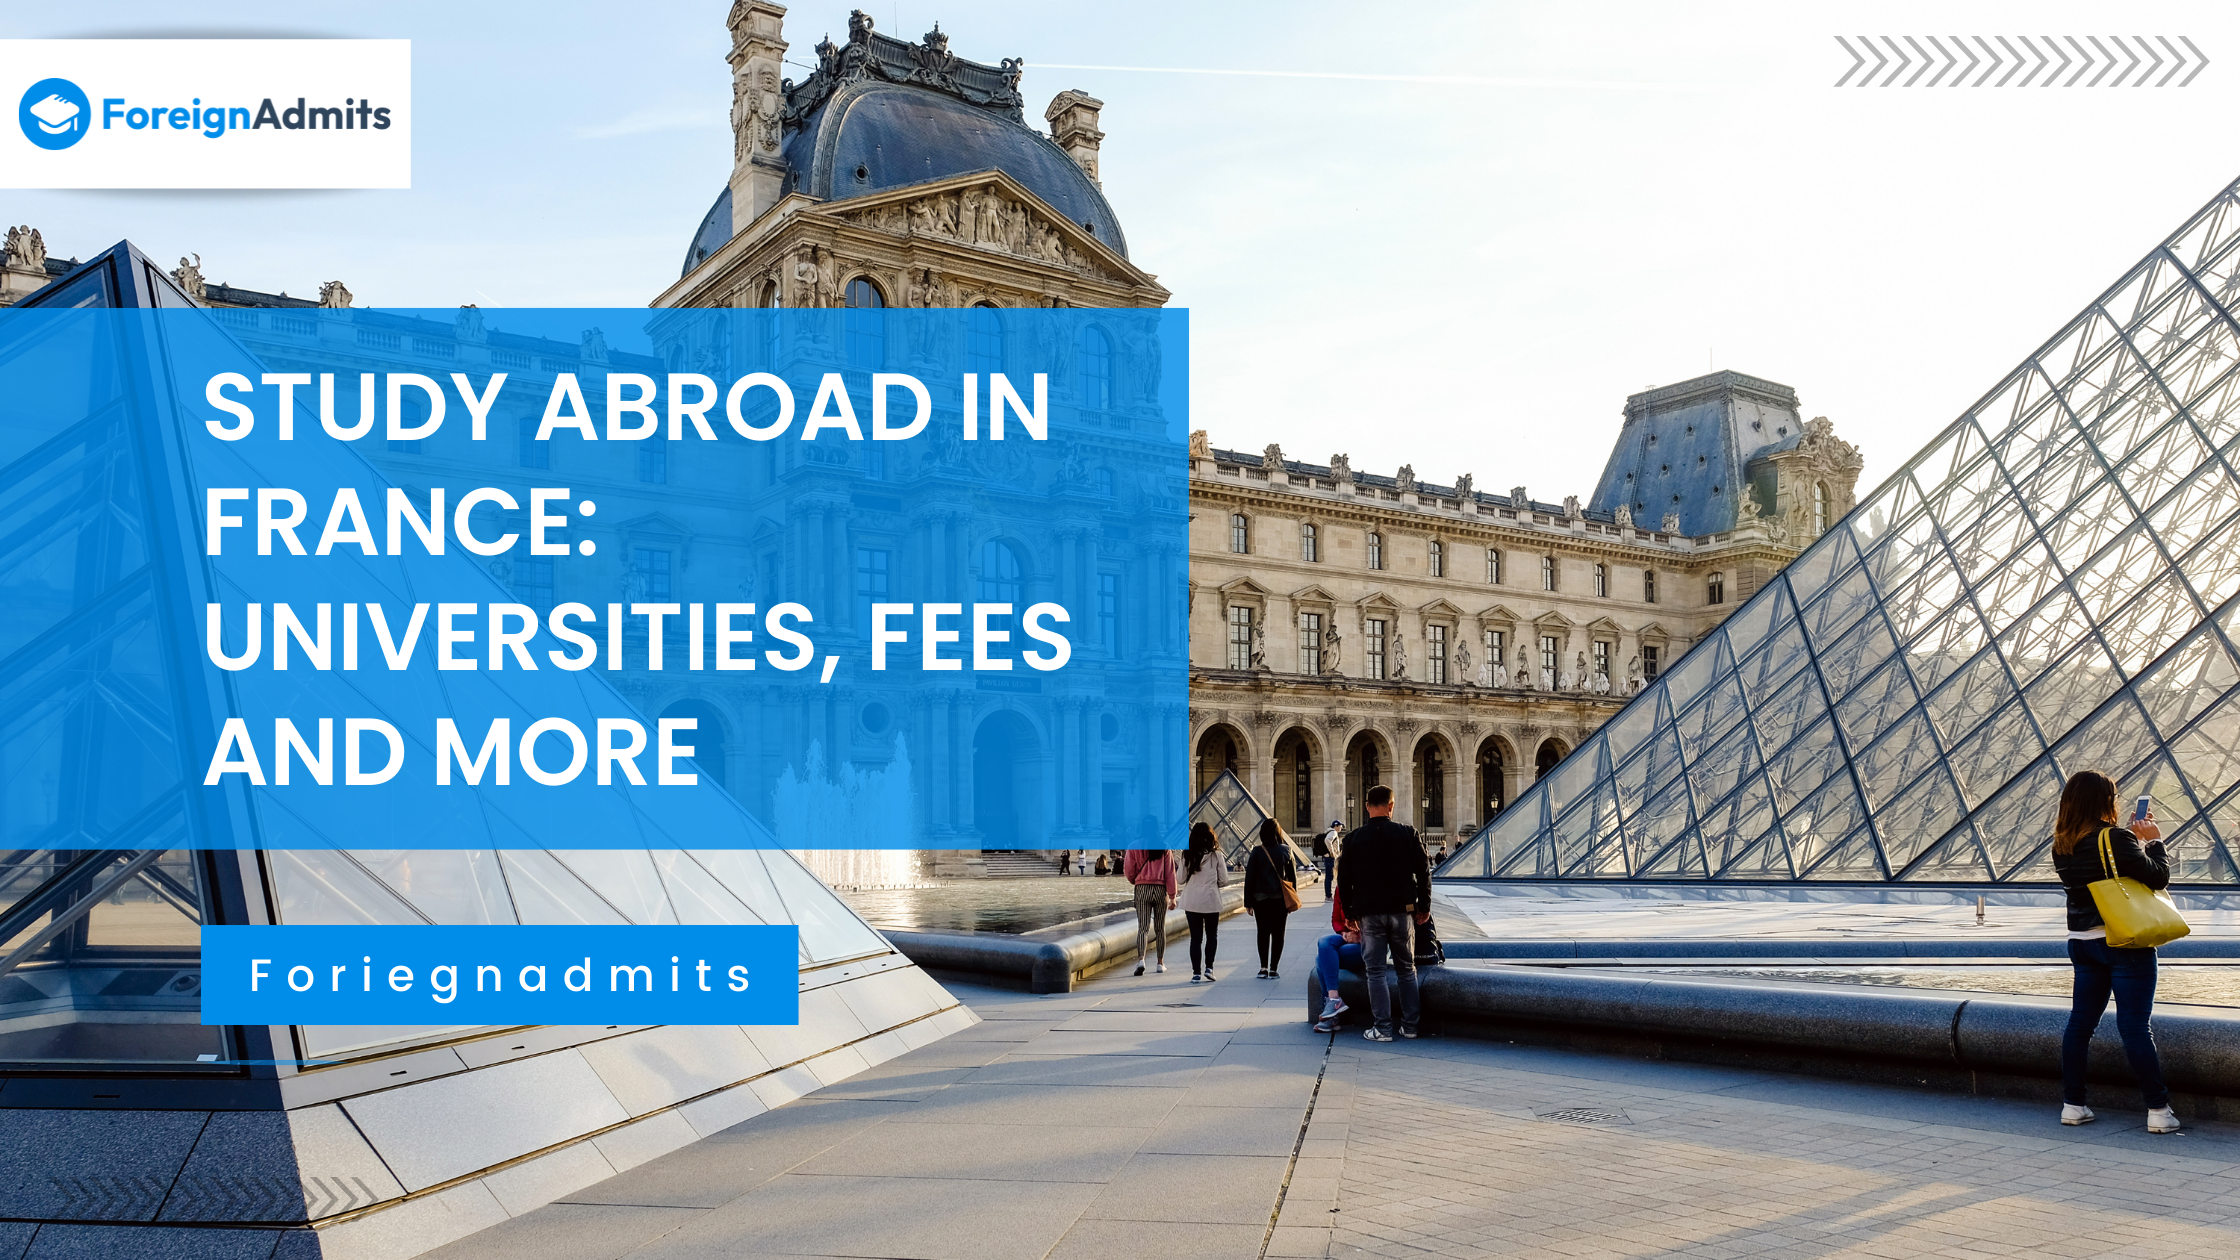 Study abroad in France: Universities, fees and more